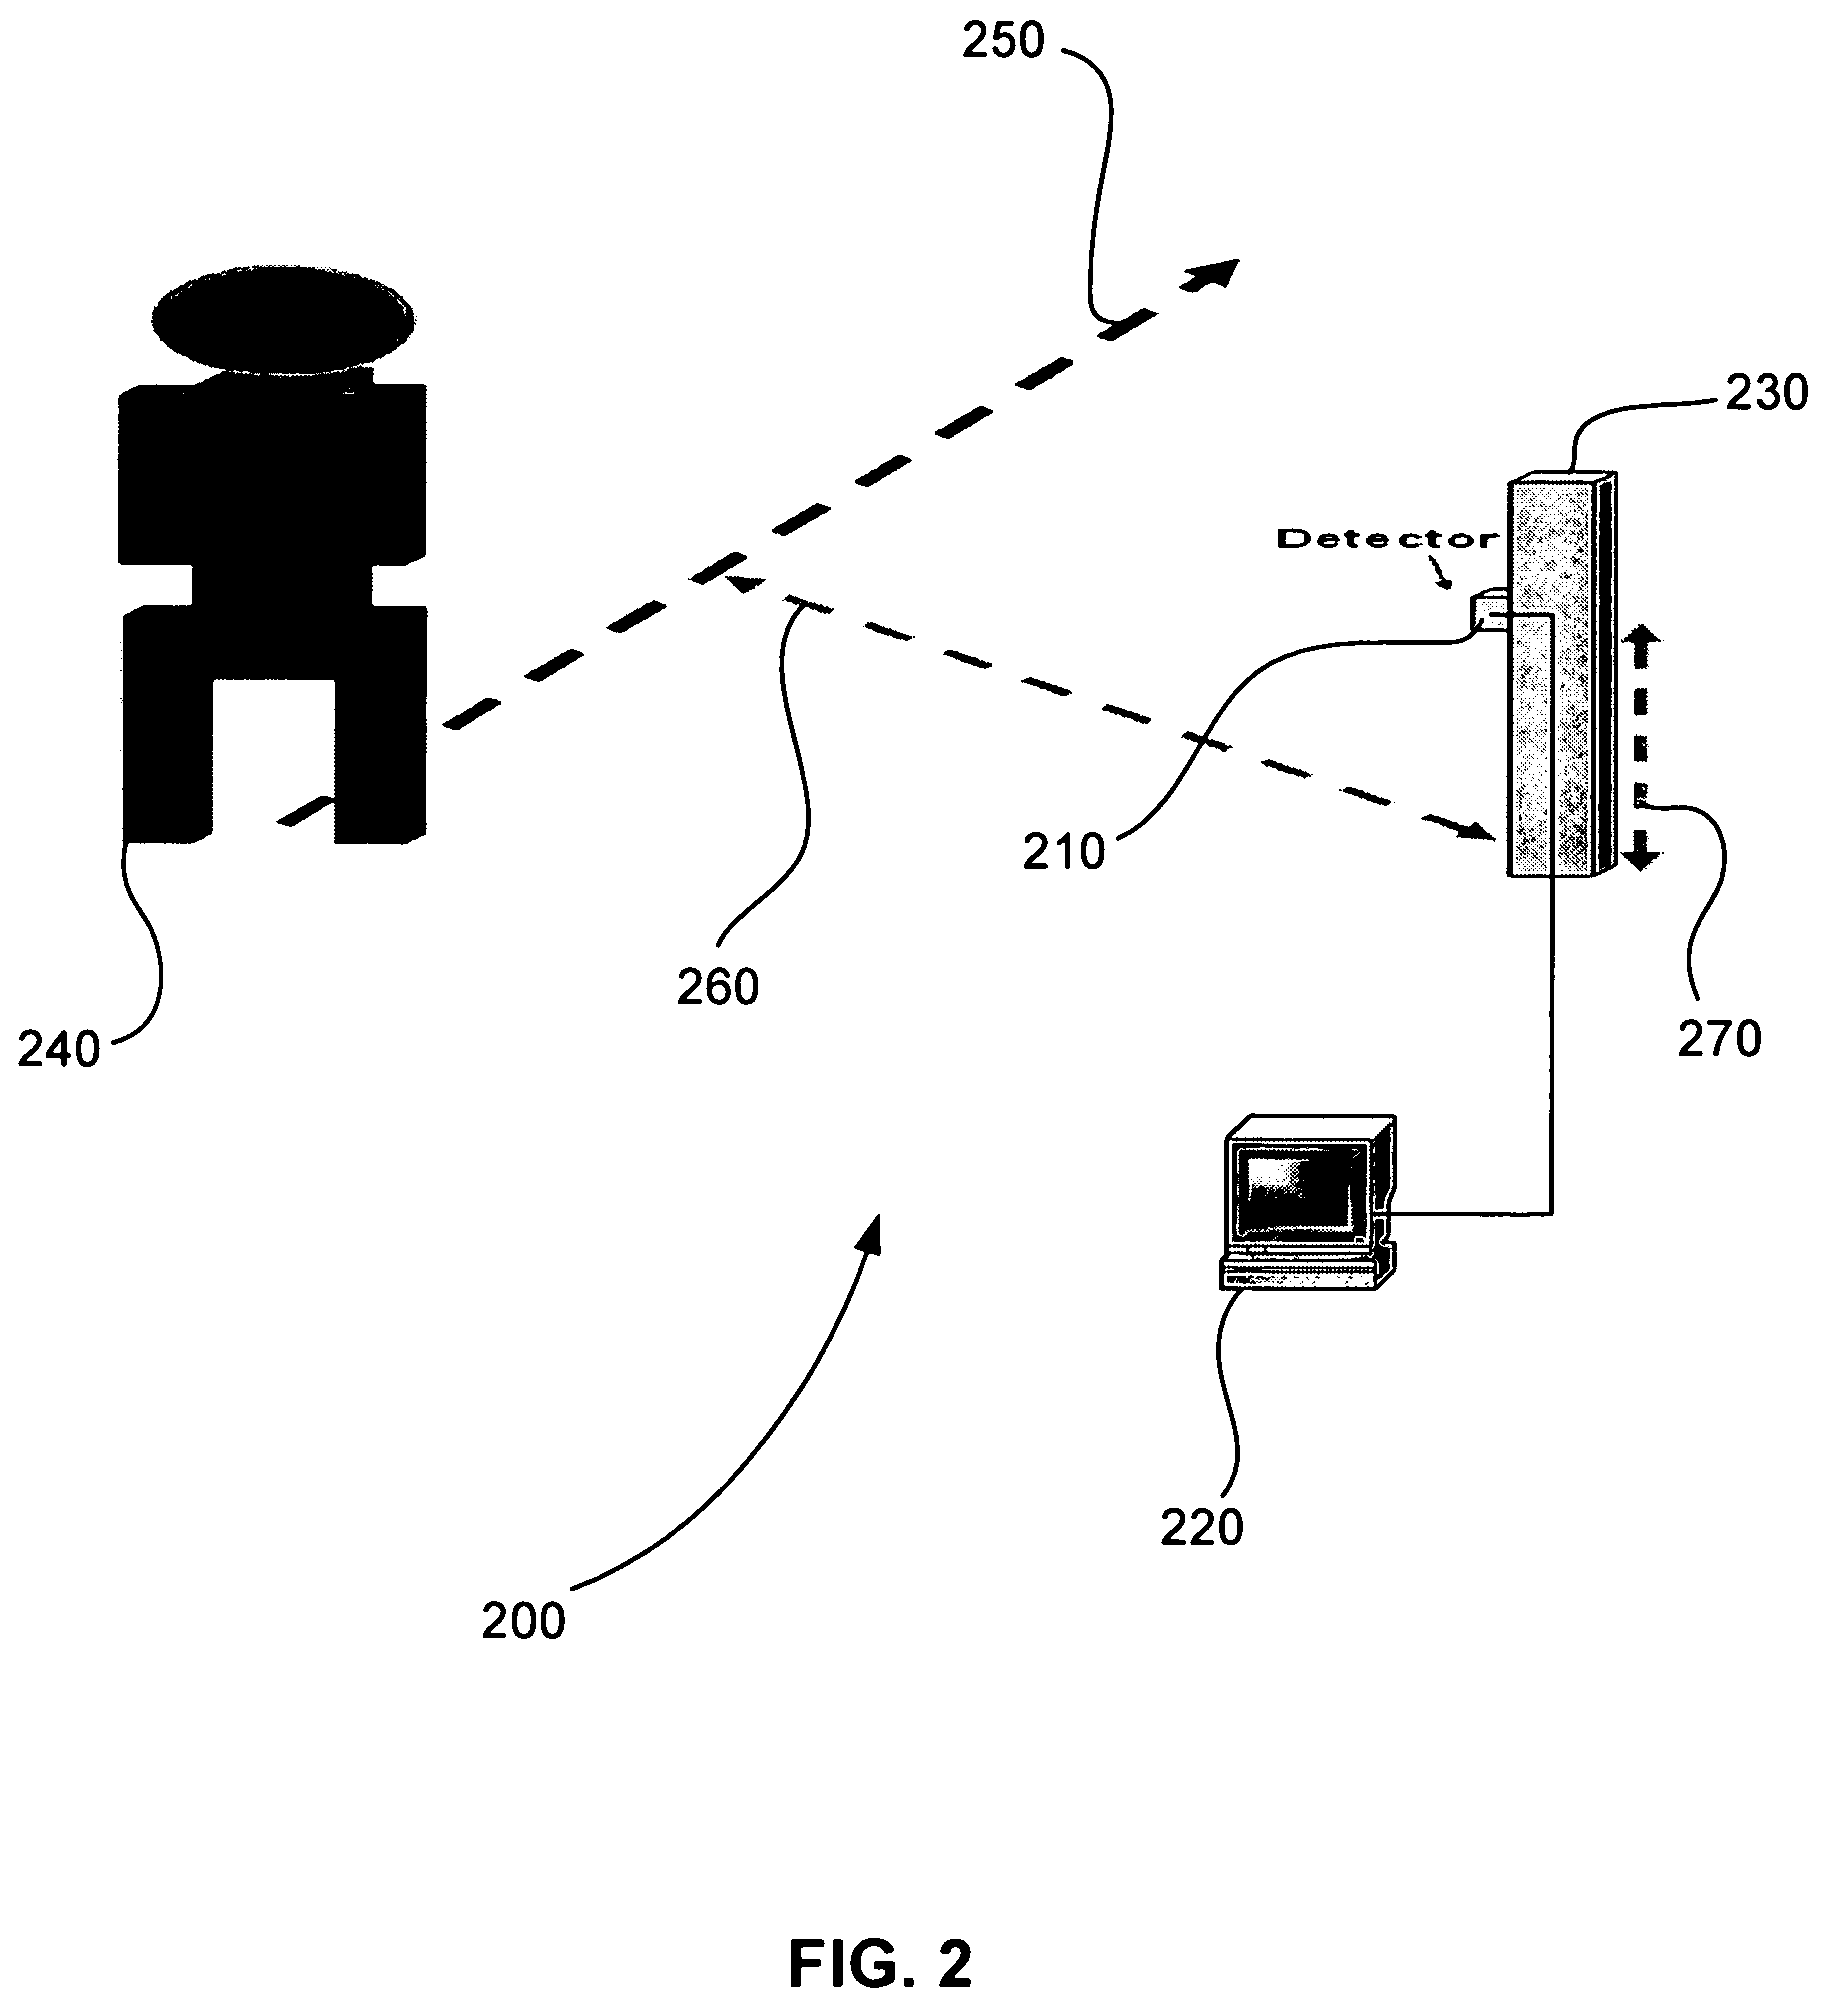 Sensor system for identifying and tracking movements of multiple sources